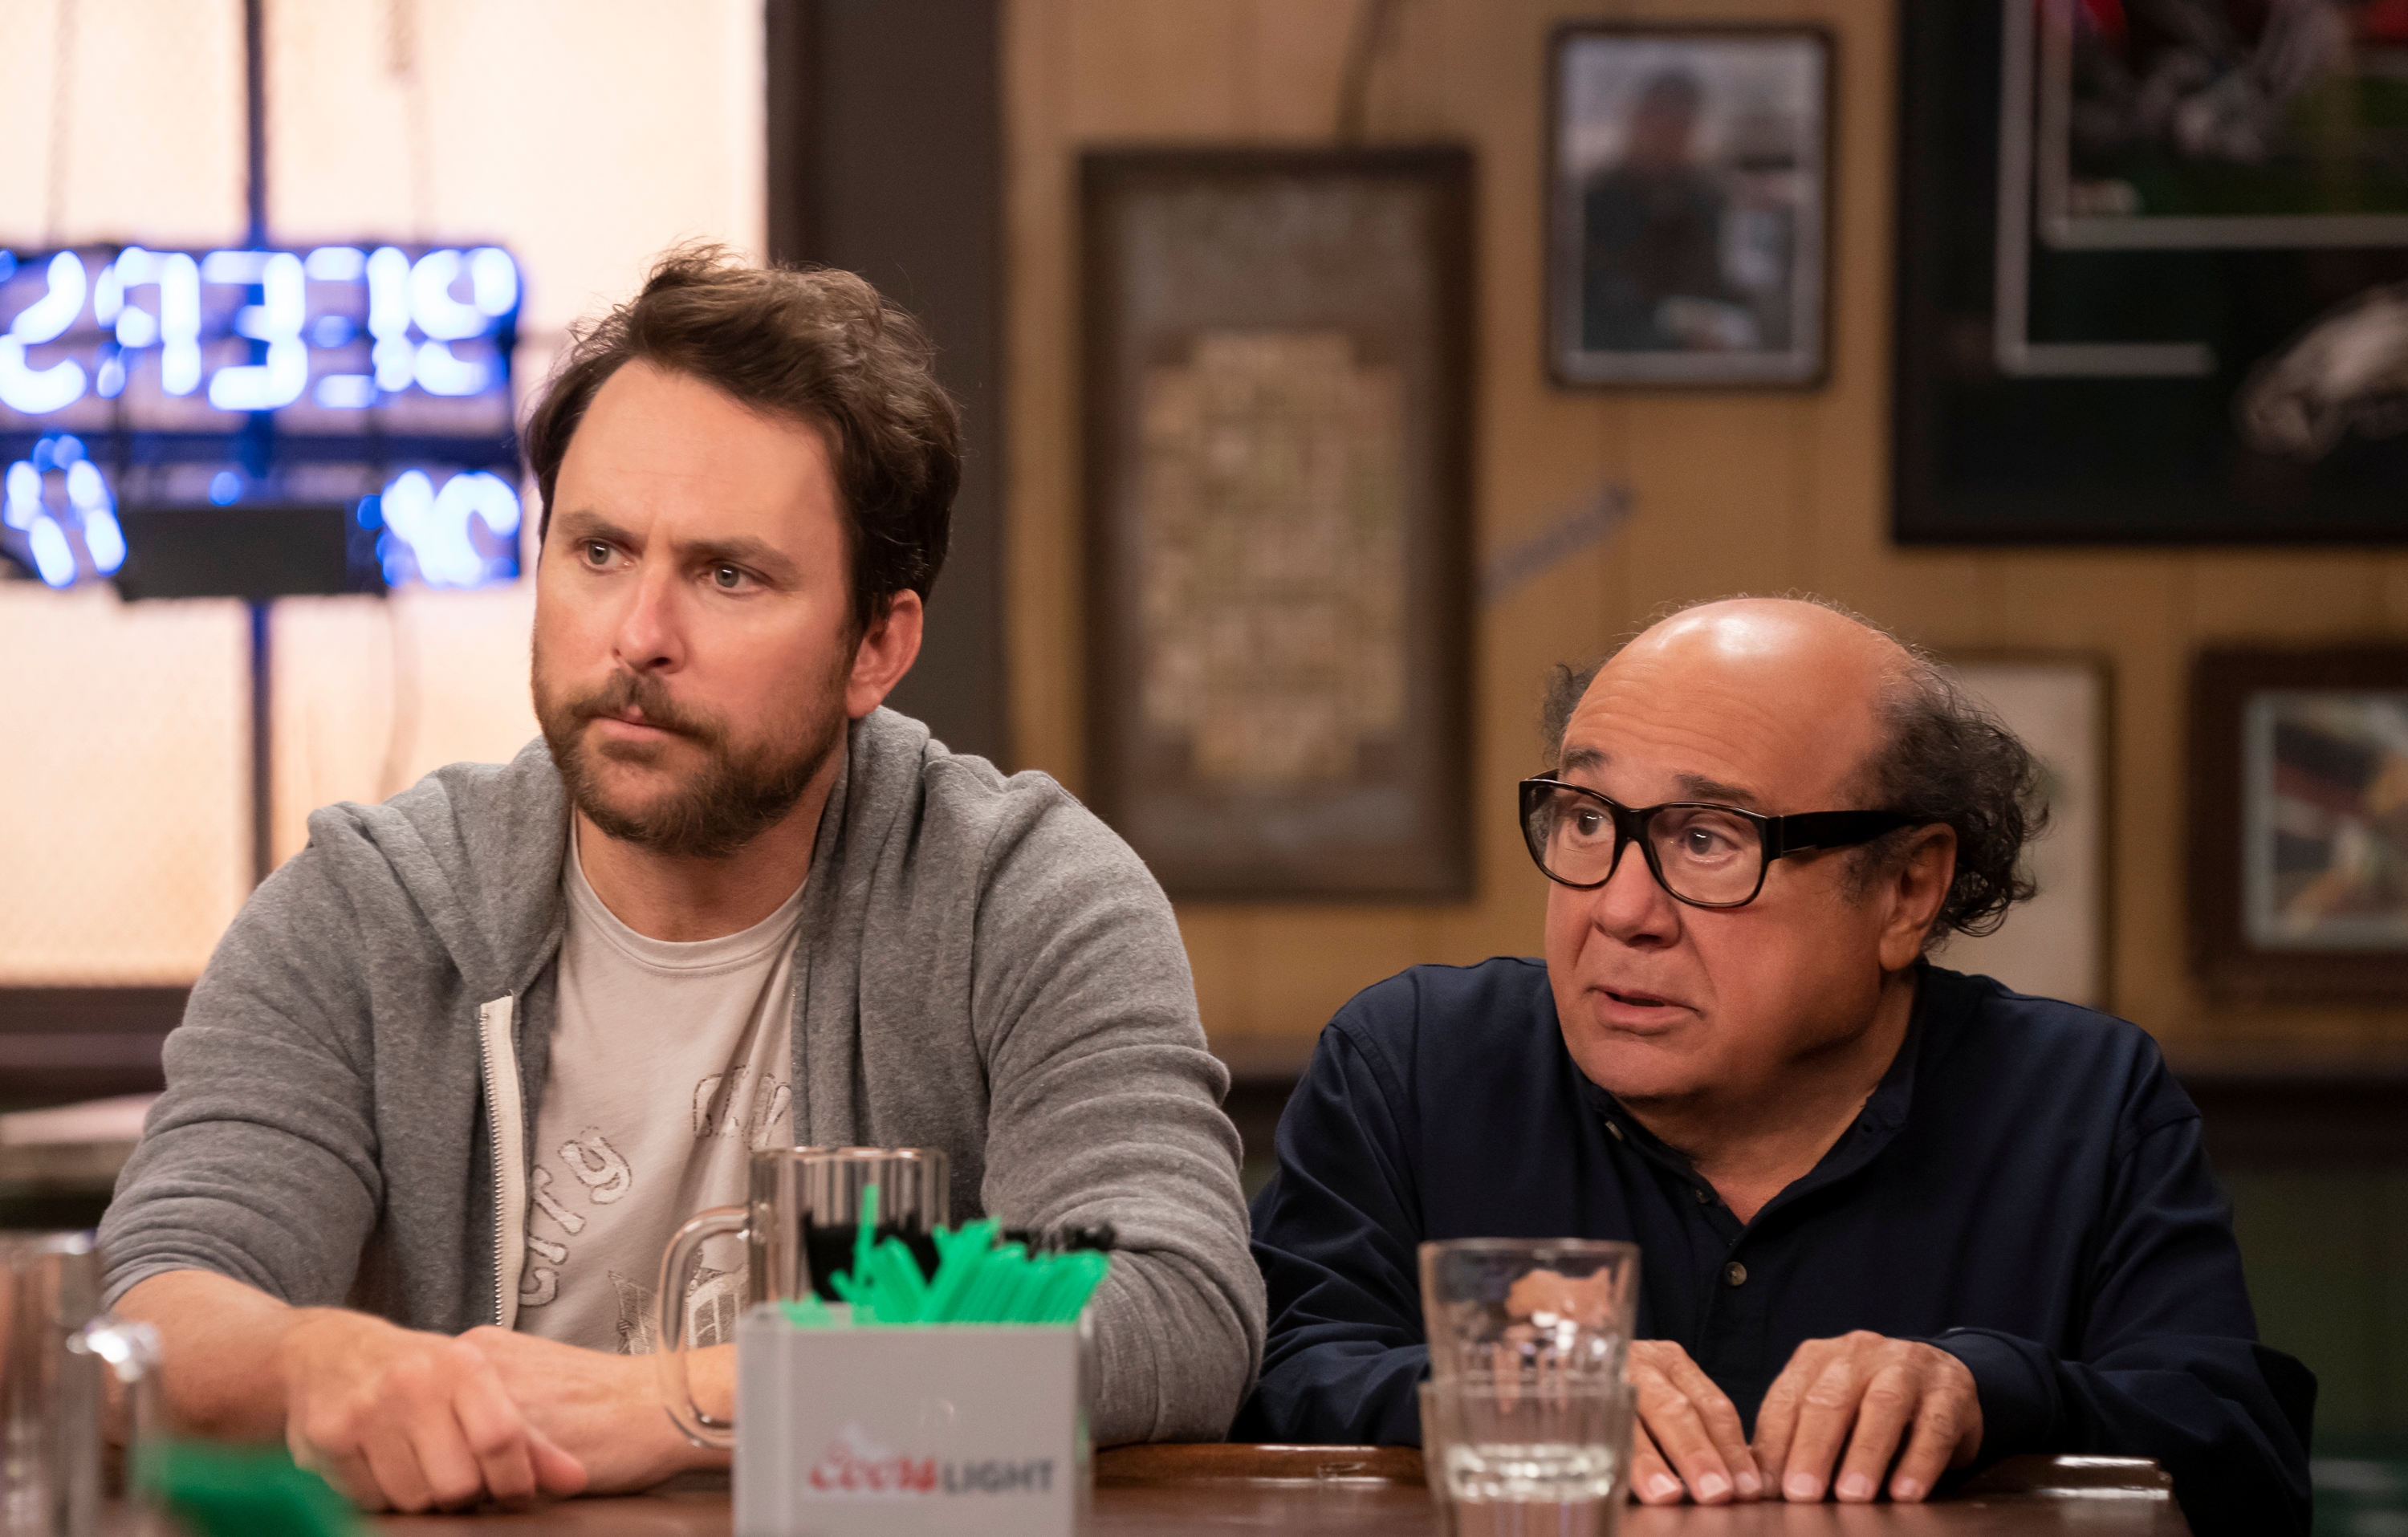 A felonious monkey helps It’s Always Sunny rebound from its worst episode ever